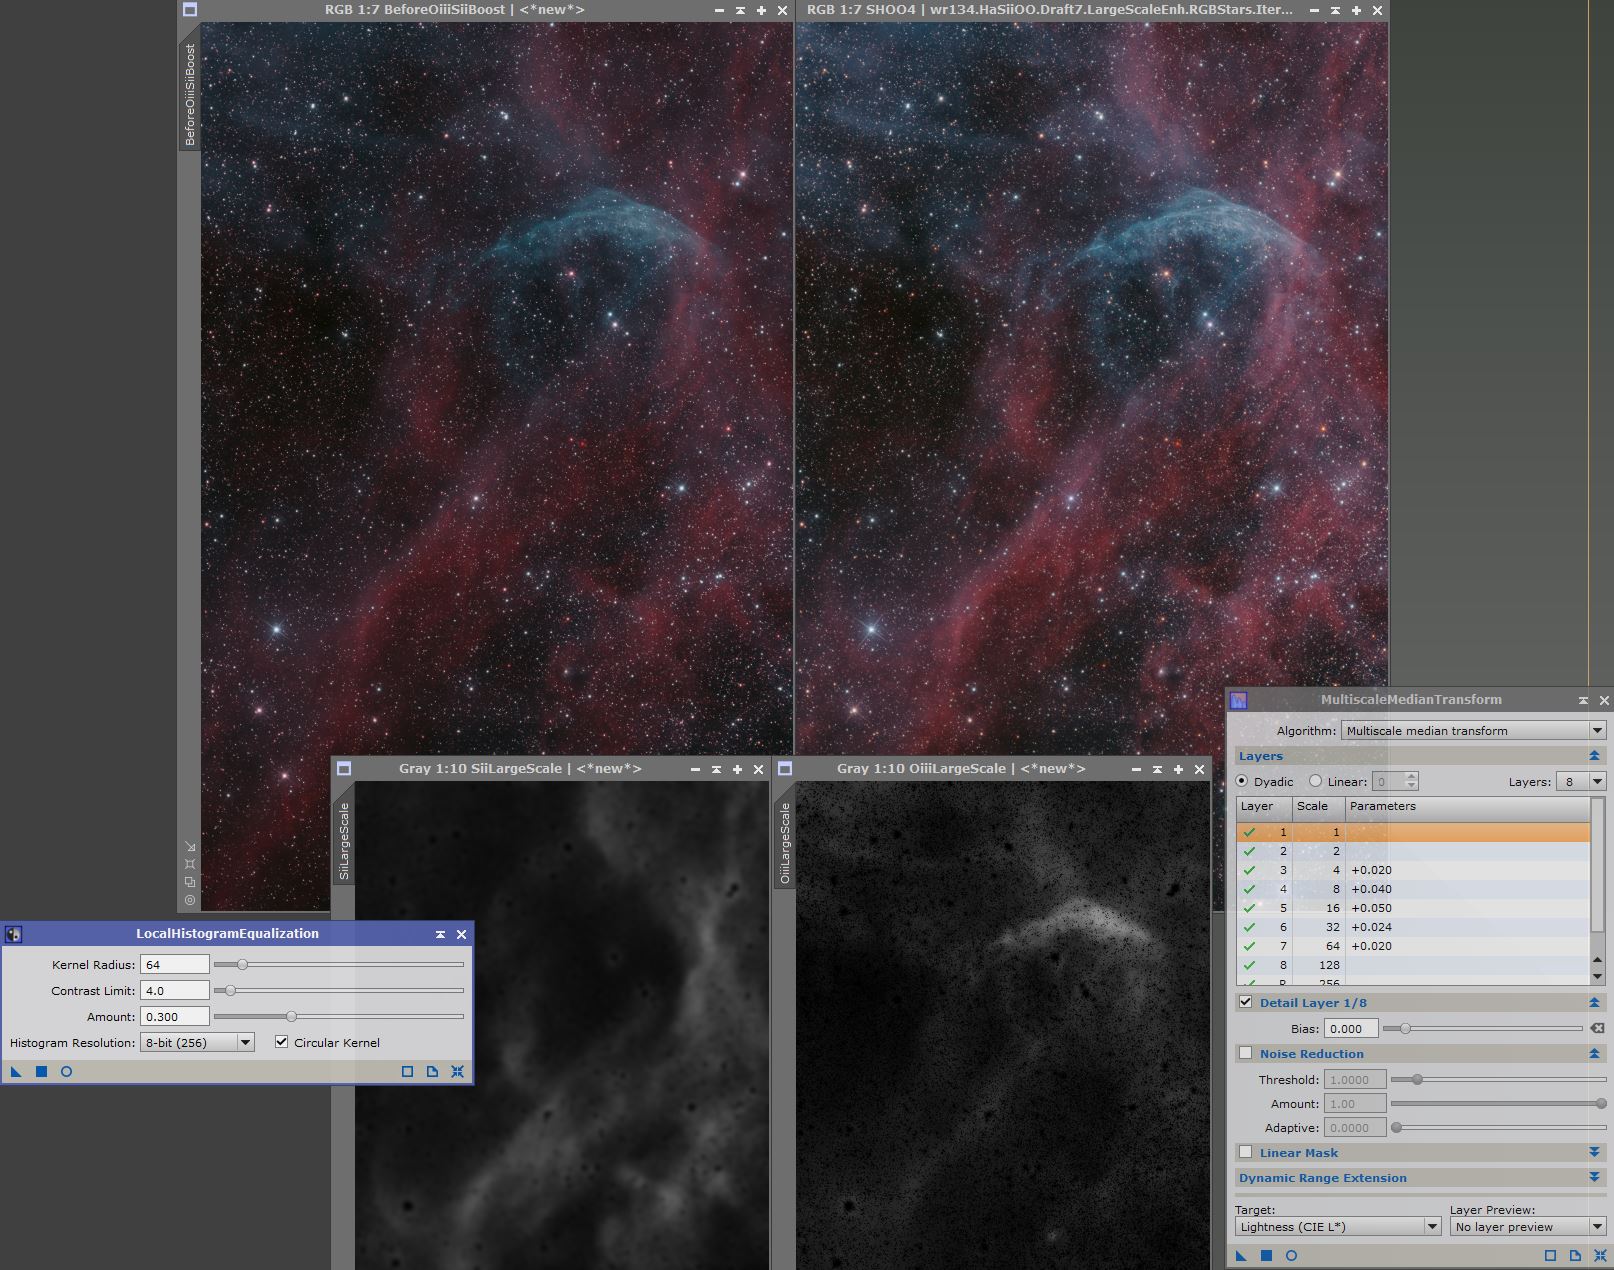 Enhancing contrast in Oiii and Sii